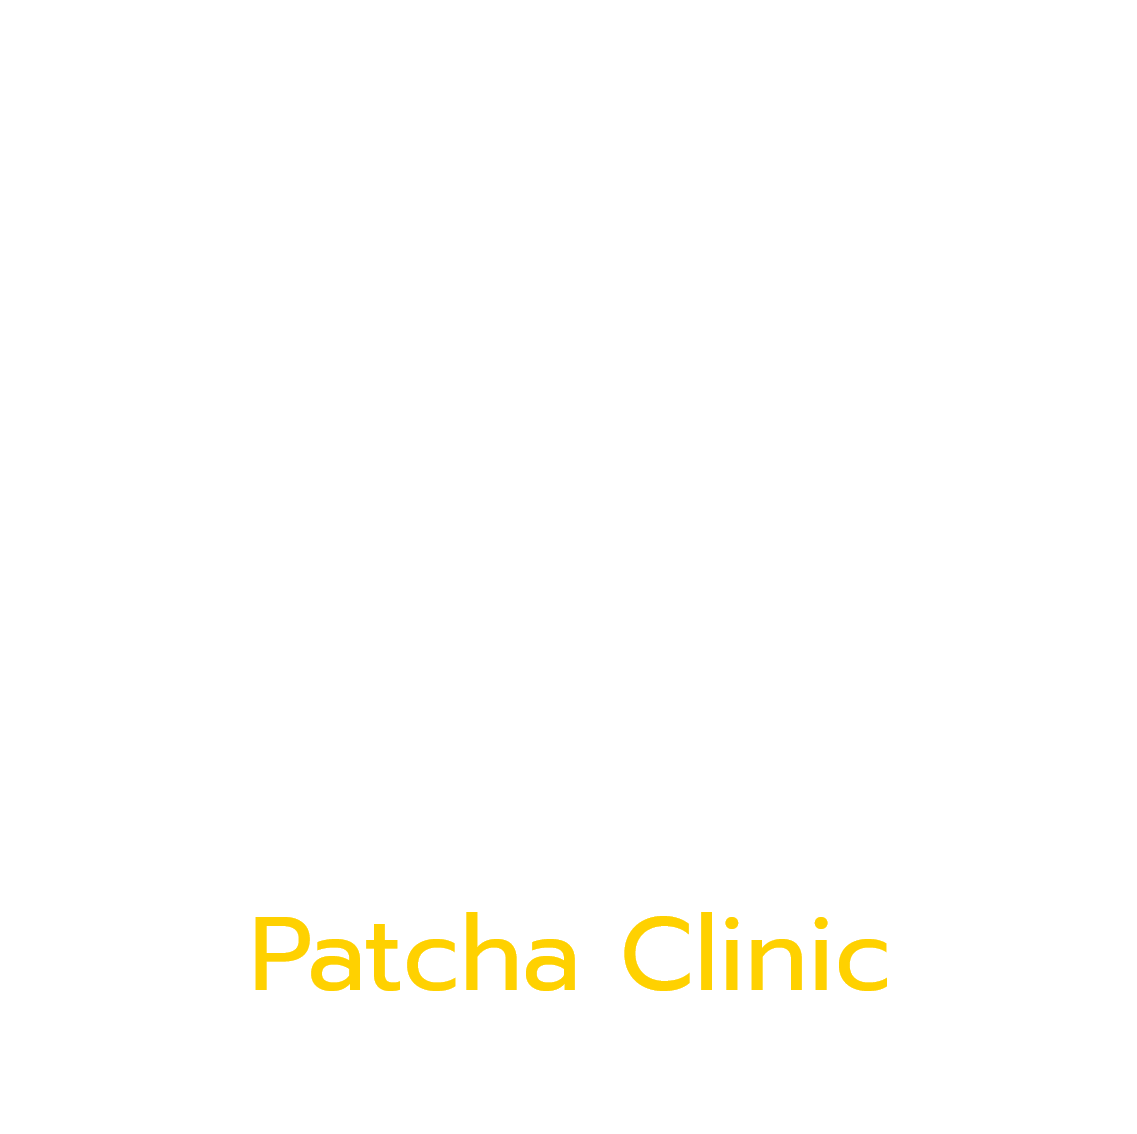 home, Patcha Clinic